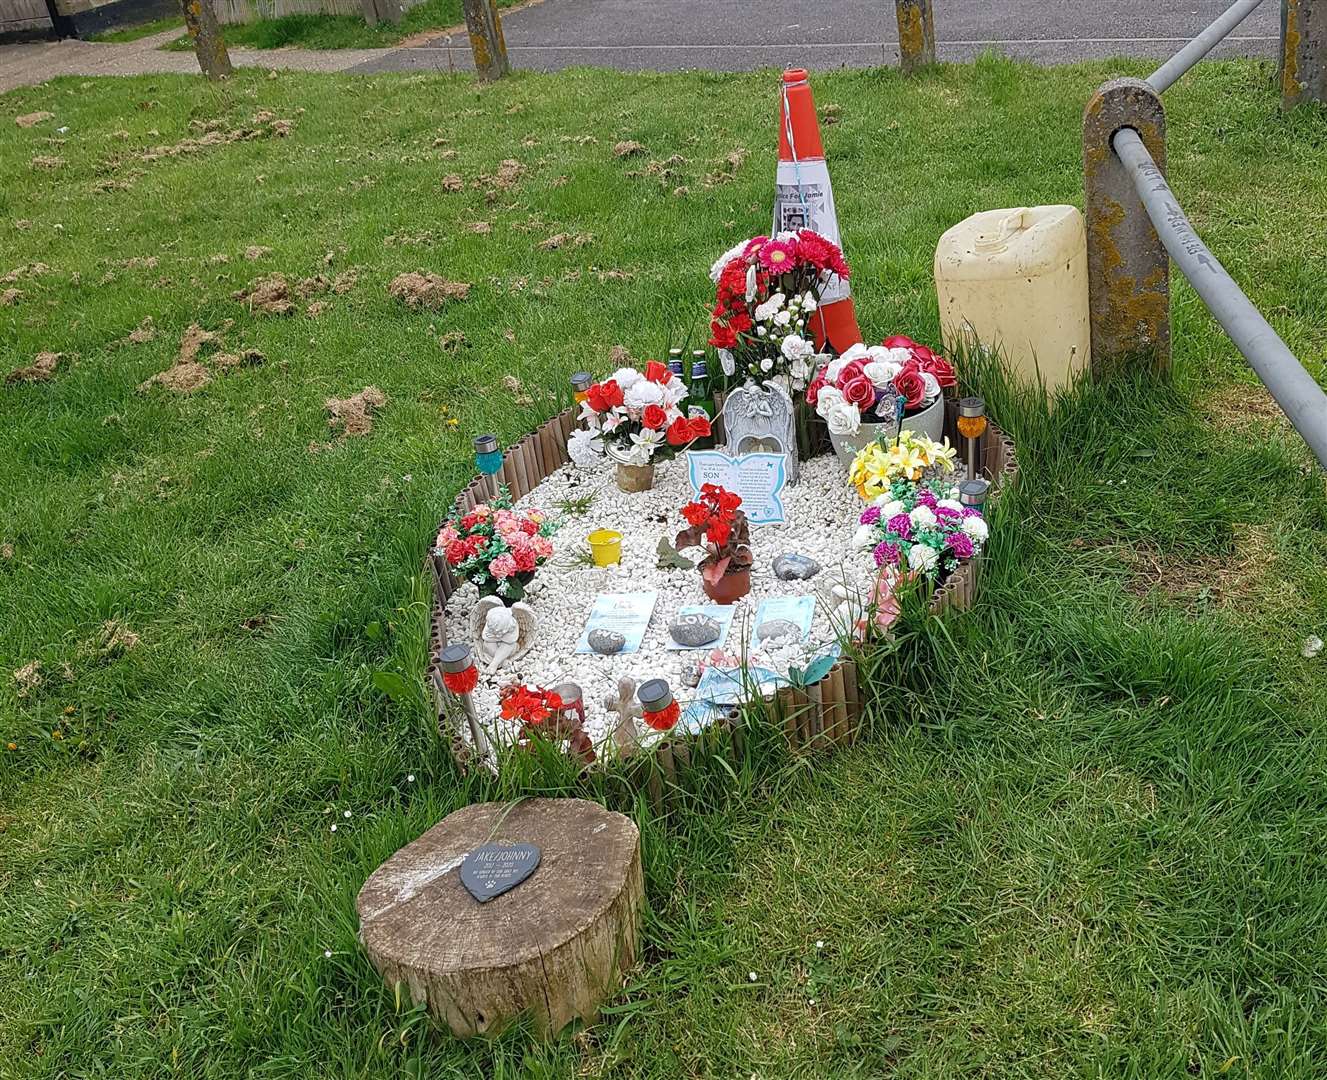 A memorial to Jamie Simmons who was stabbed outside his home